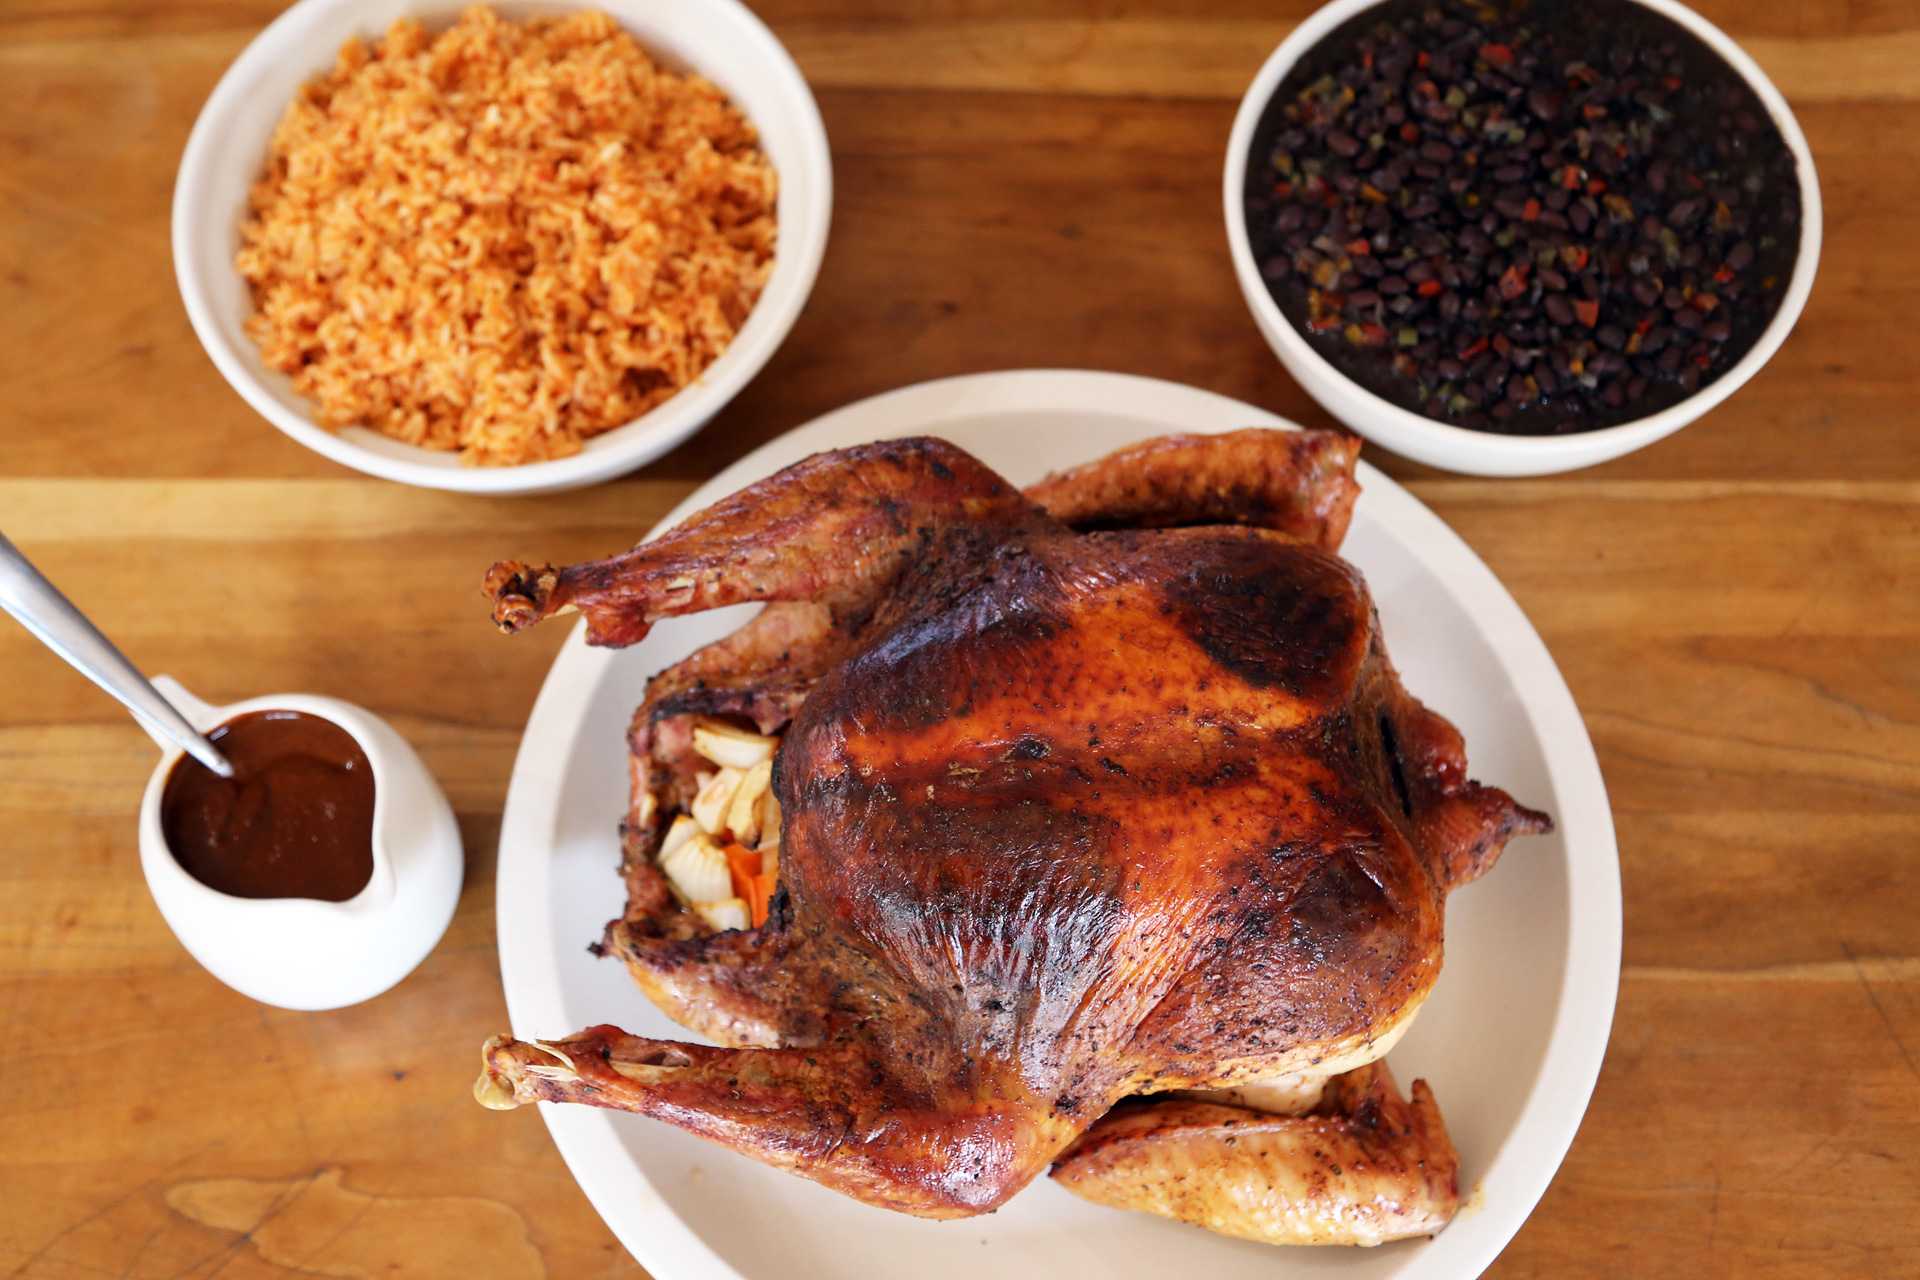  Spicy Mole Gravy can be served with Chile-Rubbed Turkey, Mexican Rice and Savory Black Beans